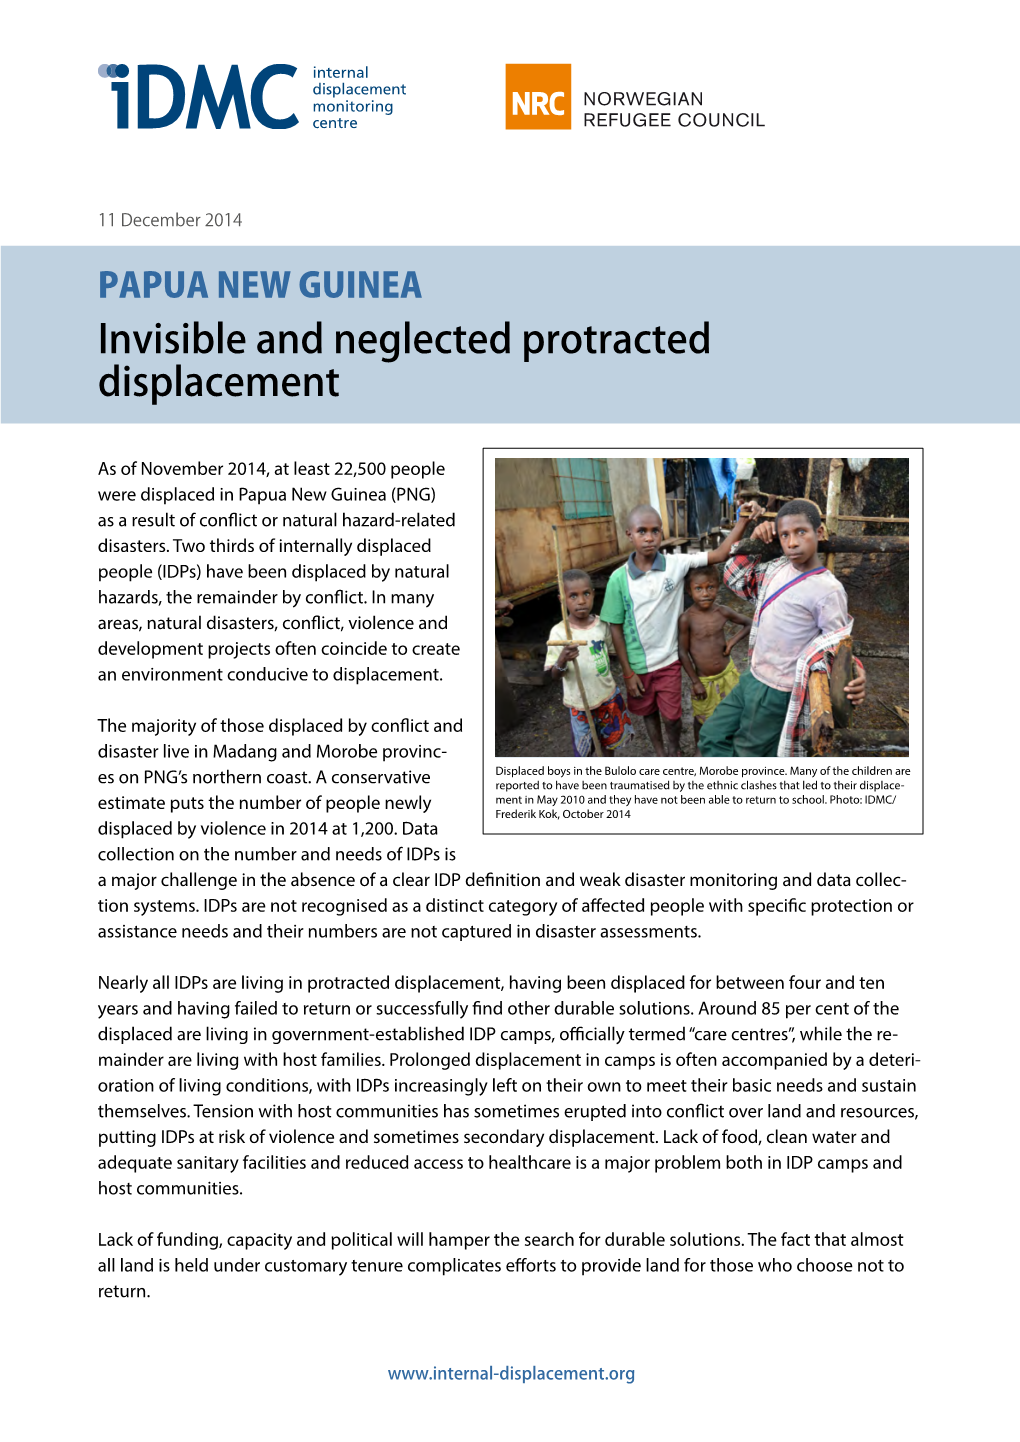 PAPUA NEW GUINEA Invisible and Neglected Protracted Displacement